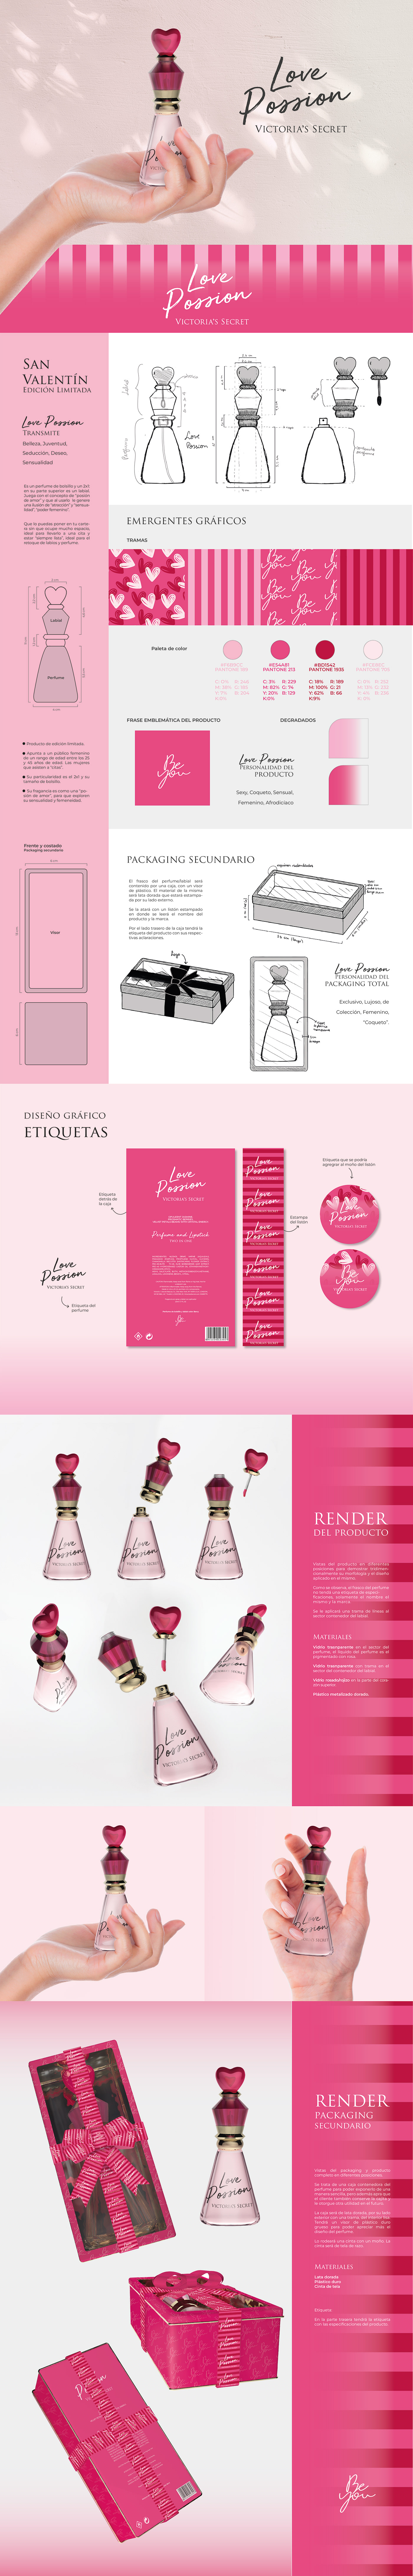 branding  graphic design  Packaging product design  diseño gráfico marca